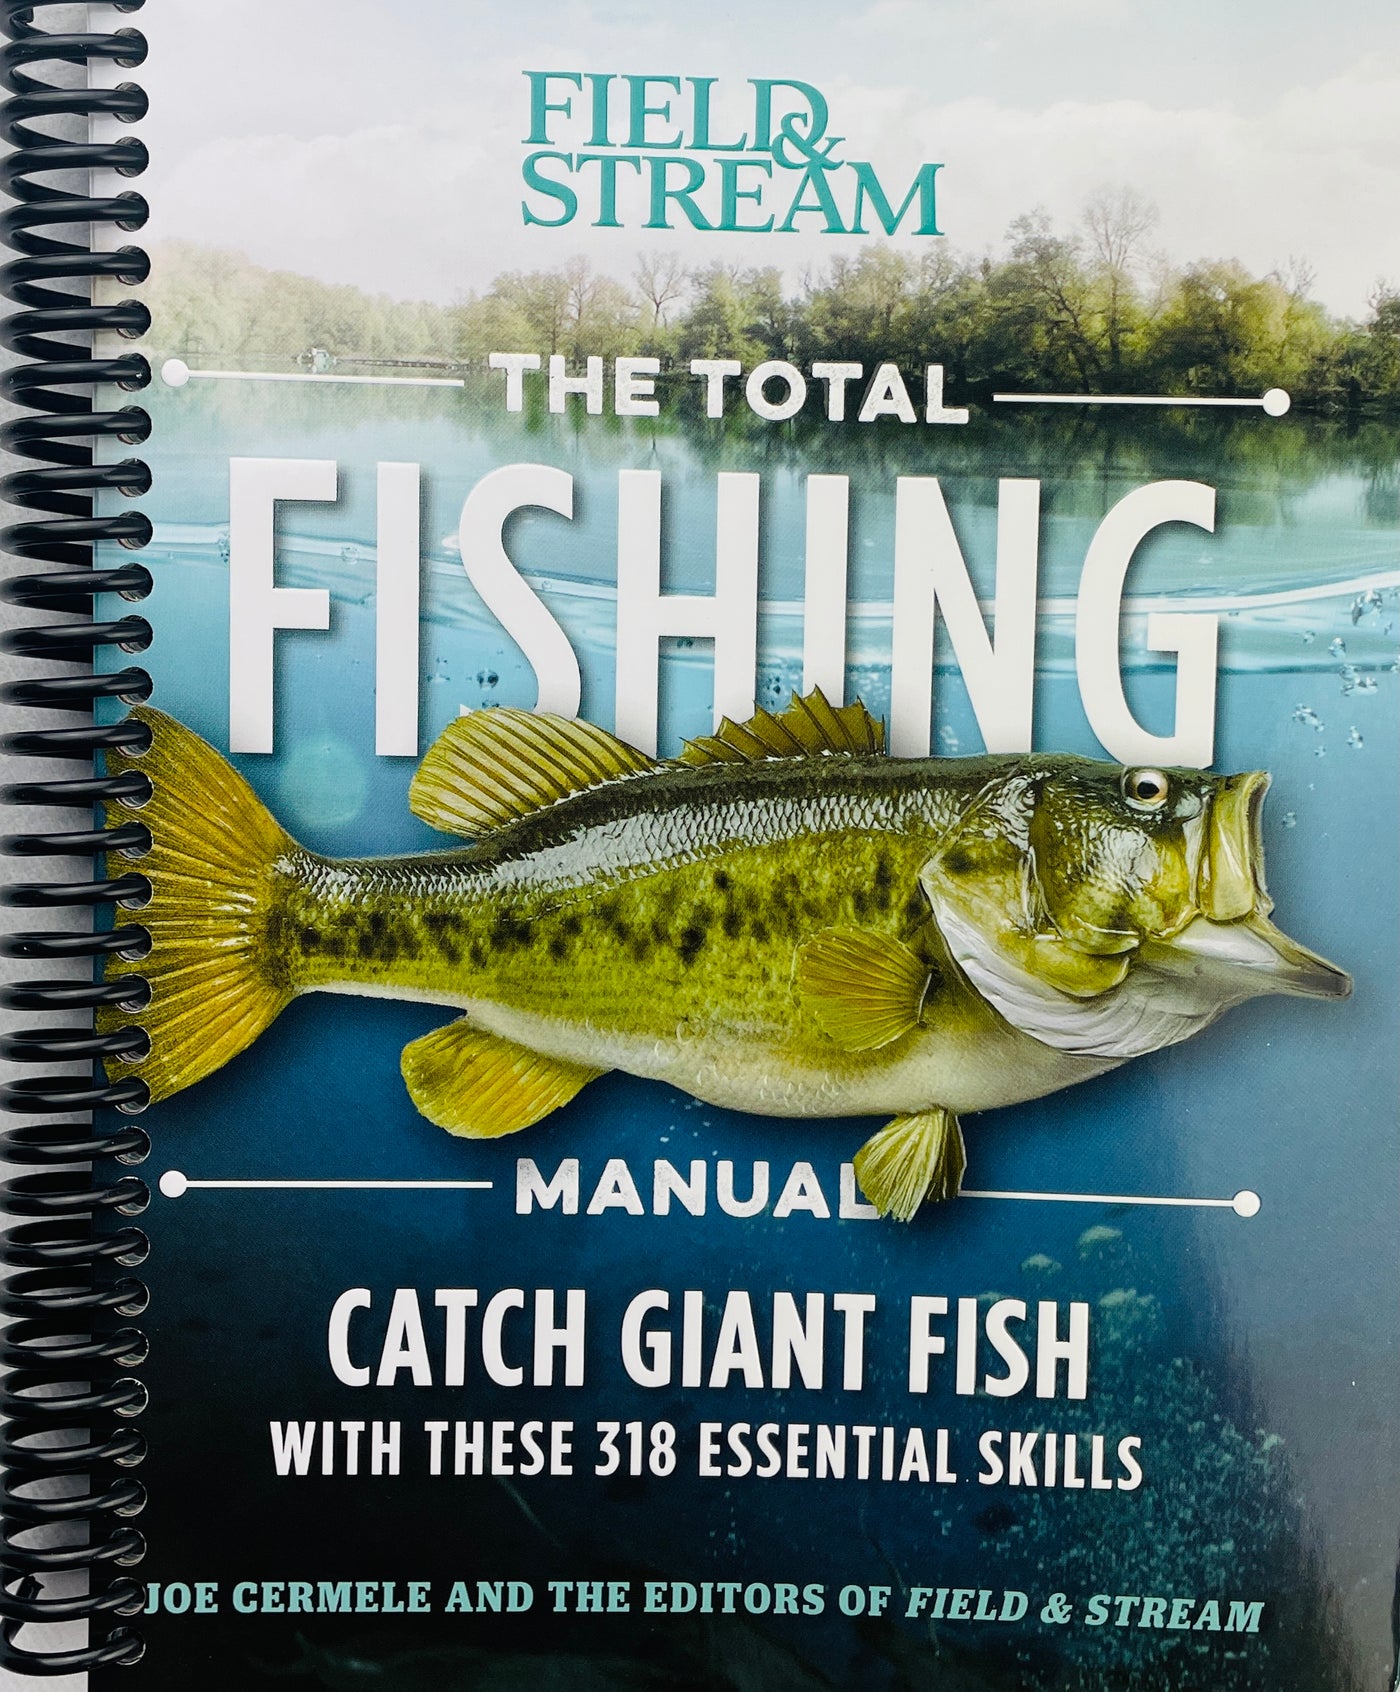 The Total Fishing Manual : 318 Essential Fishing Skills (Field & Stream) (Spiral Bound)